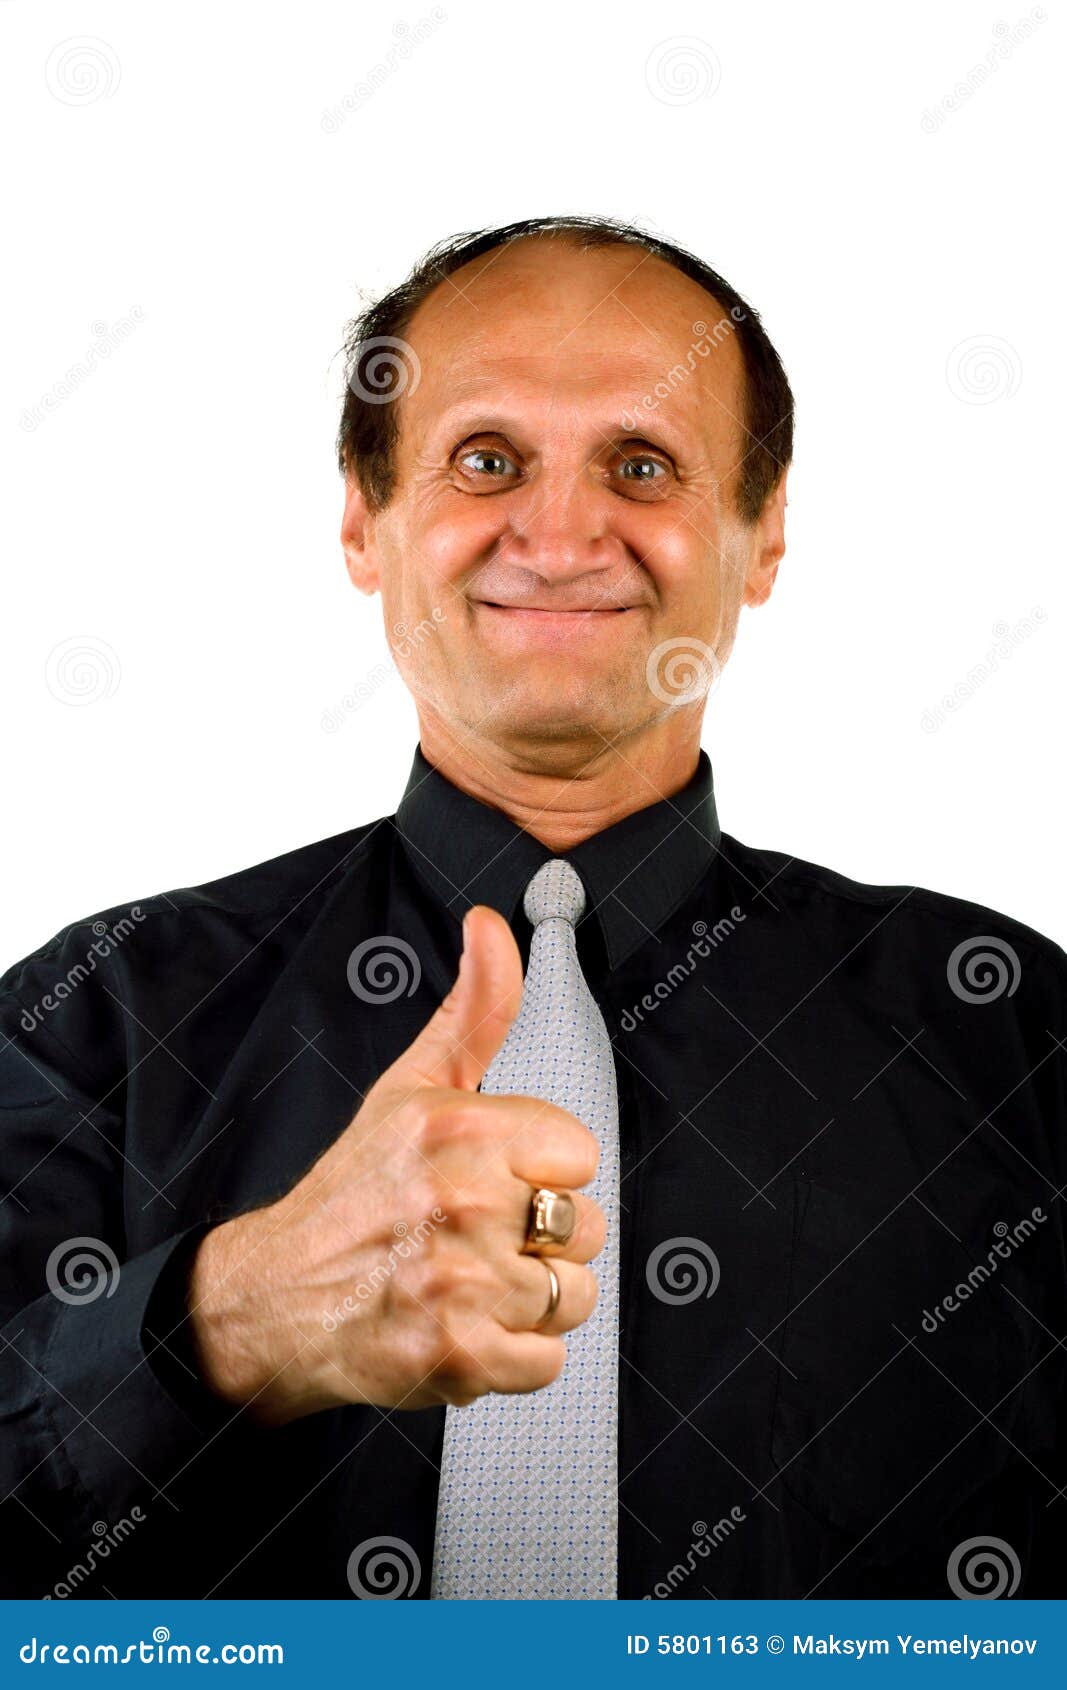 A funny person stock image. Image of necktie, businessman - 5801163